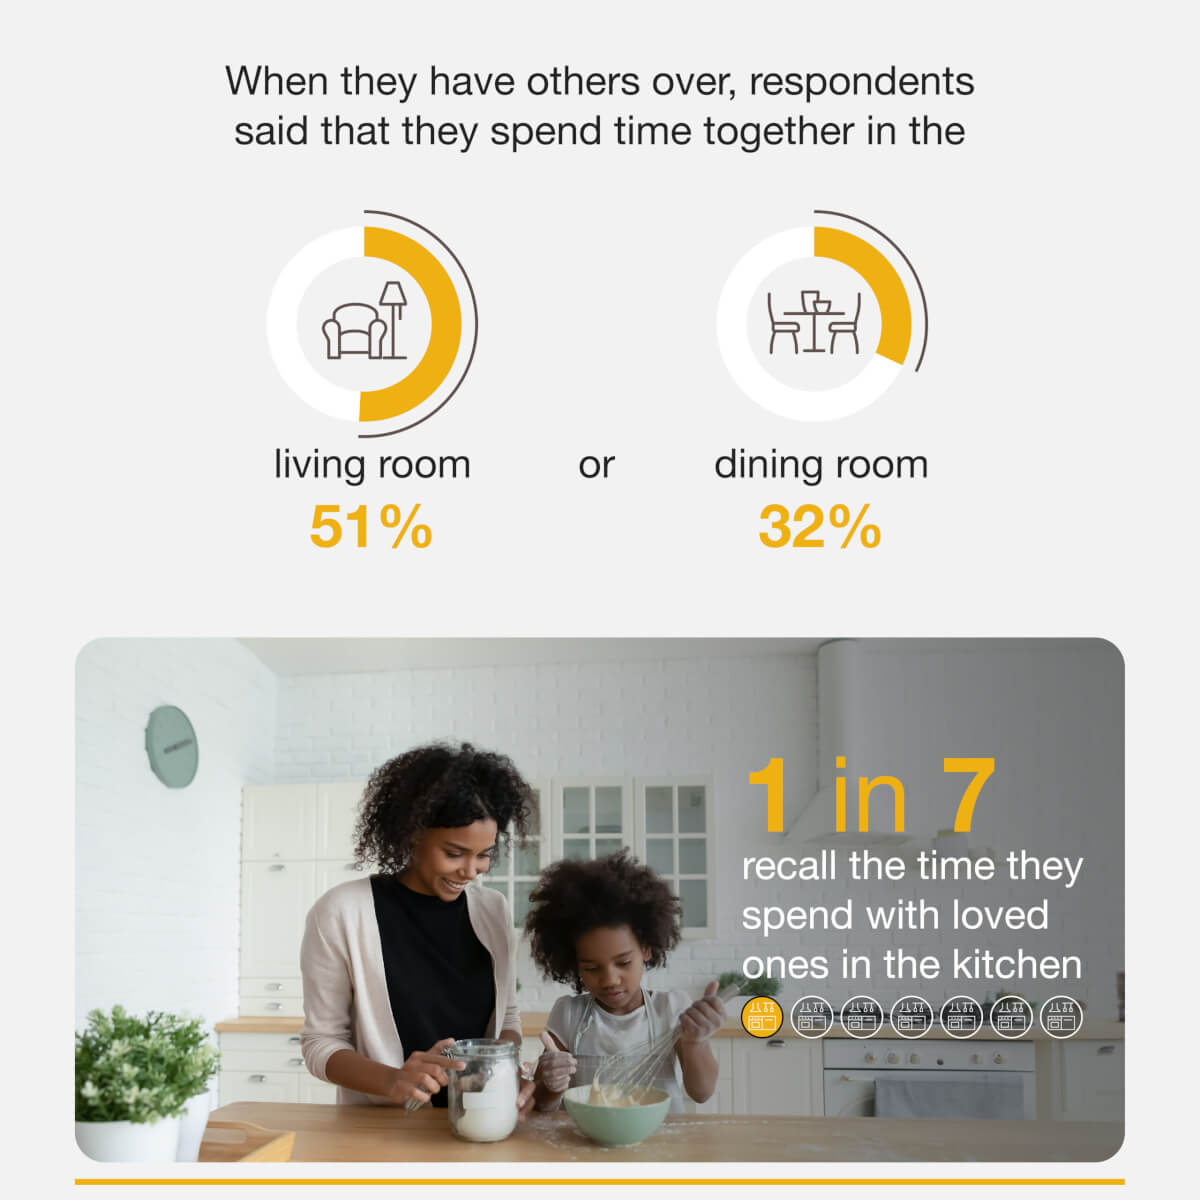 Infographic on how people prefer to entertain guests in different rooms of their home.